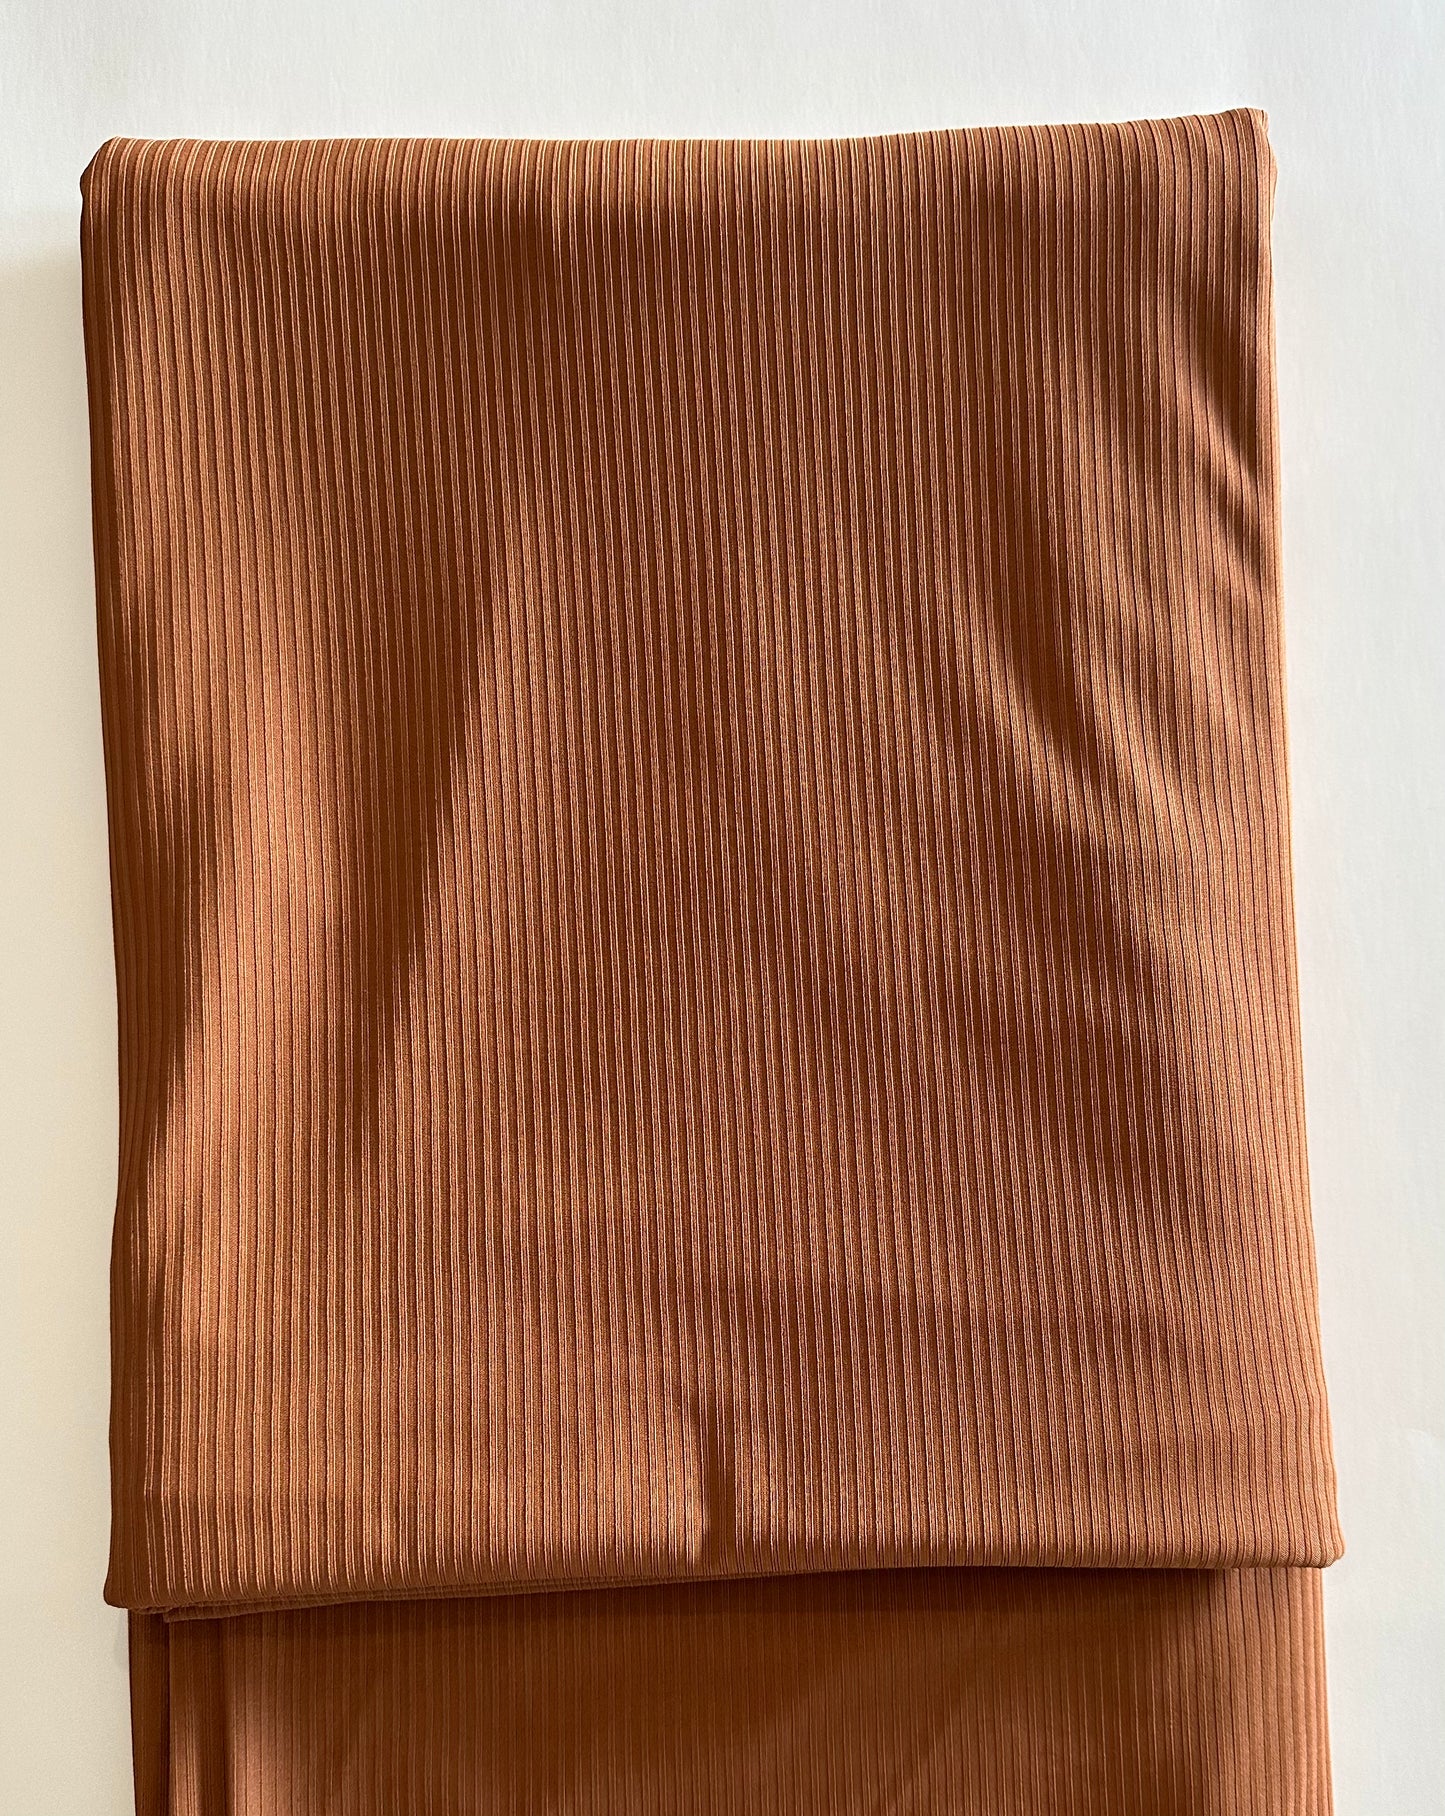 Solid Copper Rust on Unbrushed Rib Knit Fabric Sold by the 1/4 yard